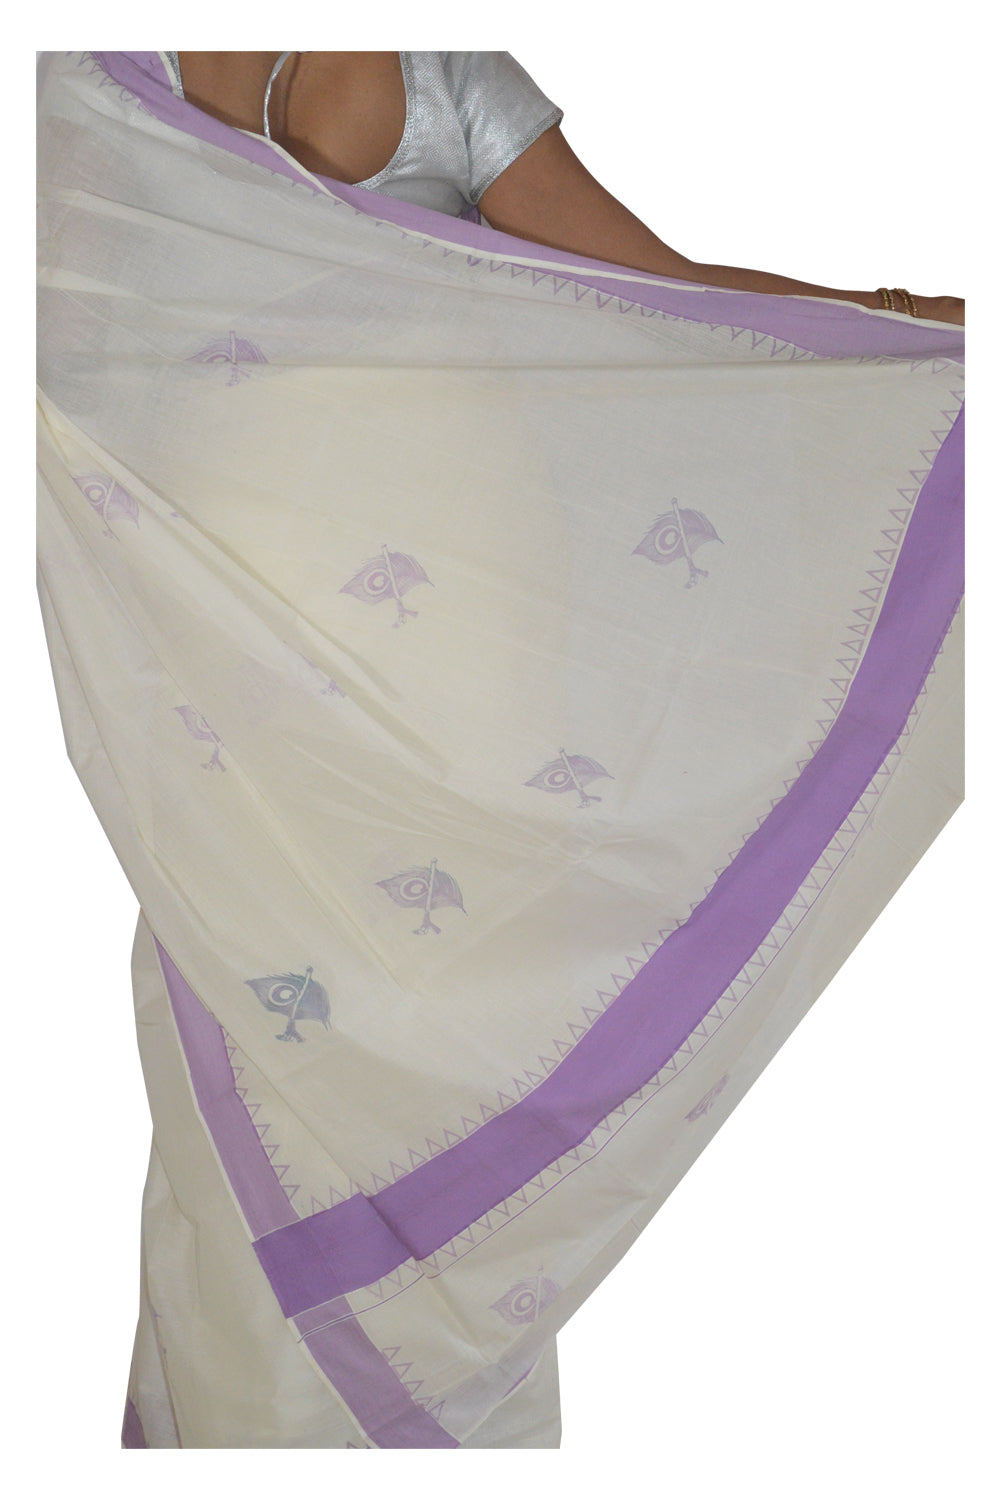 Kerala Saree with Violet Peacock Feather and Temple Border Block Print